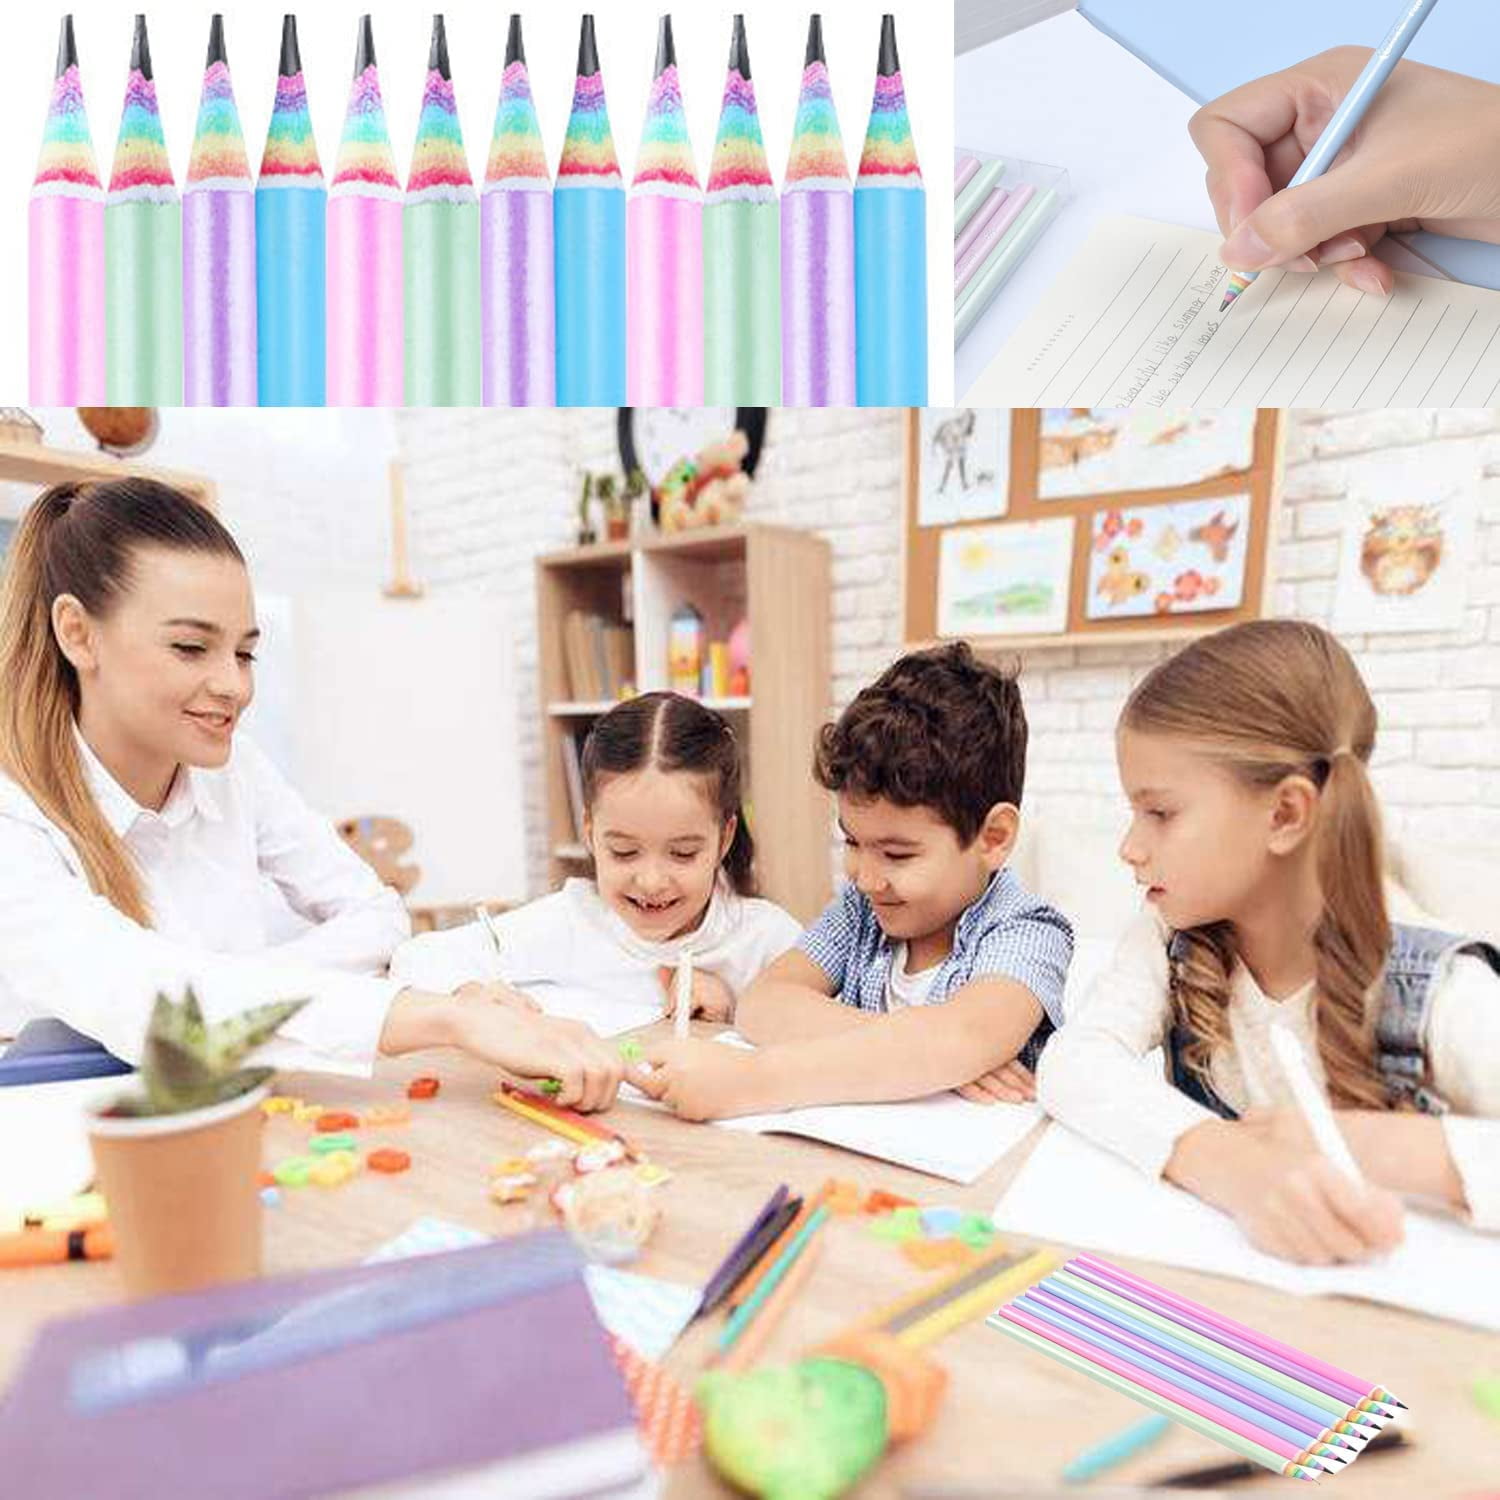 Hapikalor 12-Color Rainbow Pencils Aesthetic Jumbo Colored Pencils for  Adult Coloring Sketching Drawing, Cute Drawing Kit Fun Pencils Cool Gifts  Stuff